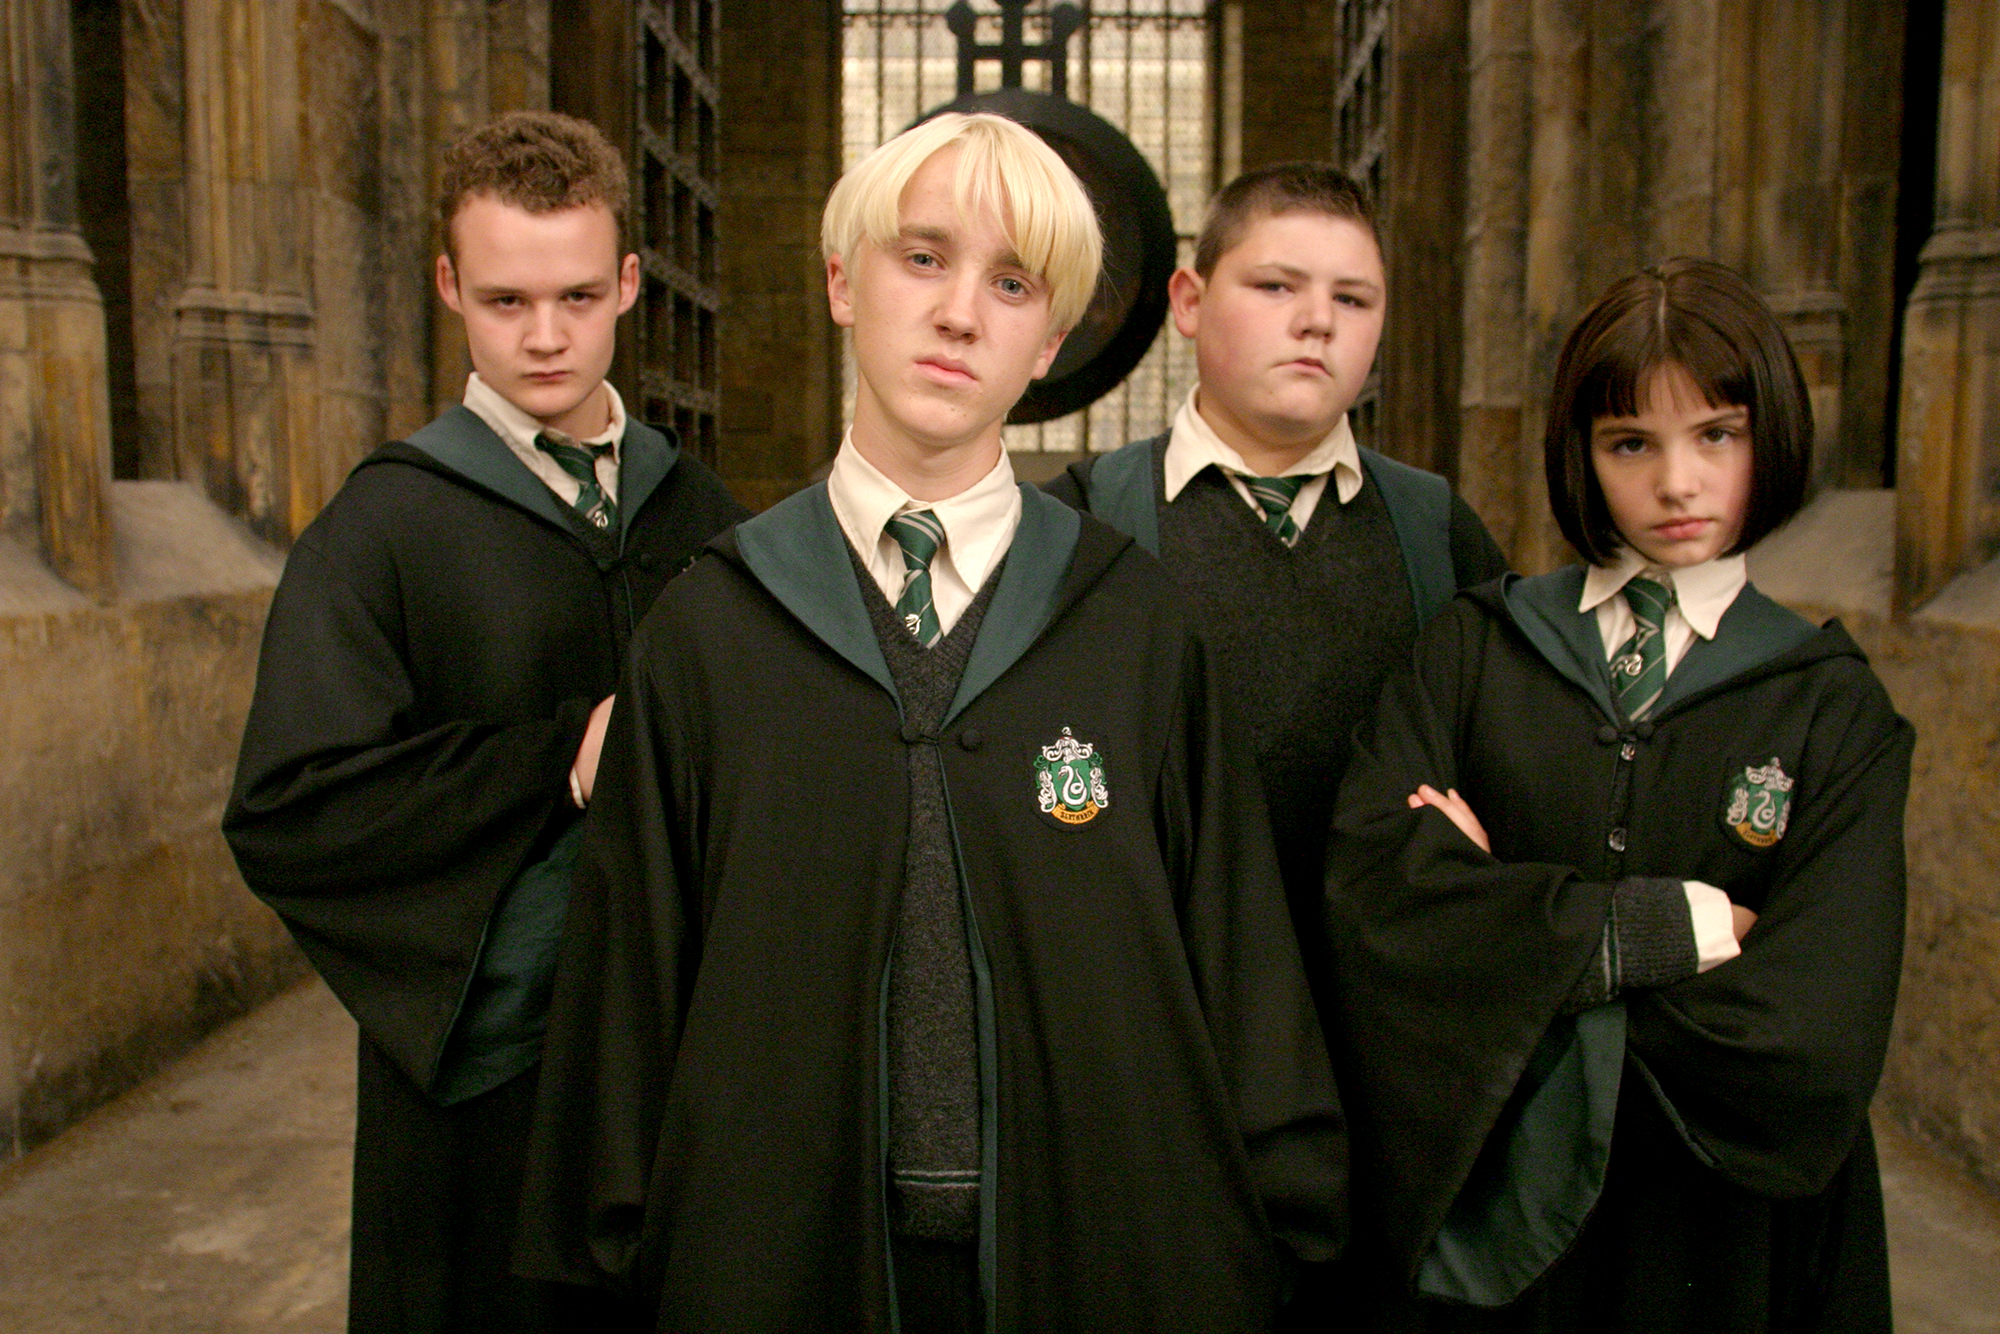 All the different ways you can be a Slytherin